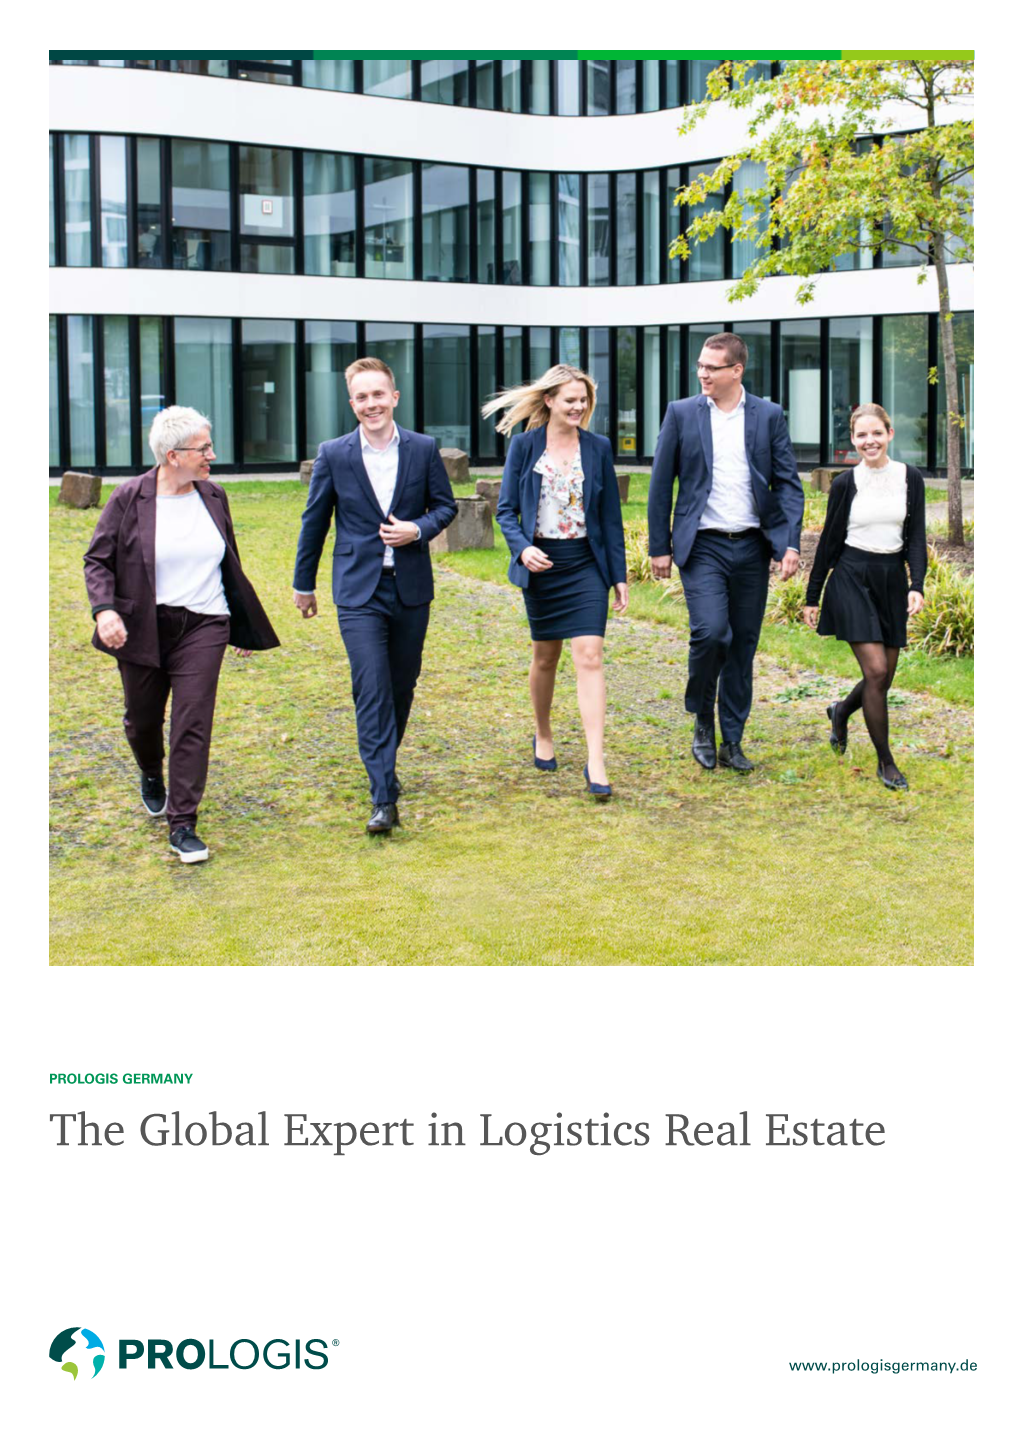 The Global Expert in Logistics Real Estate